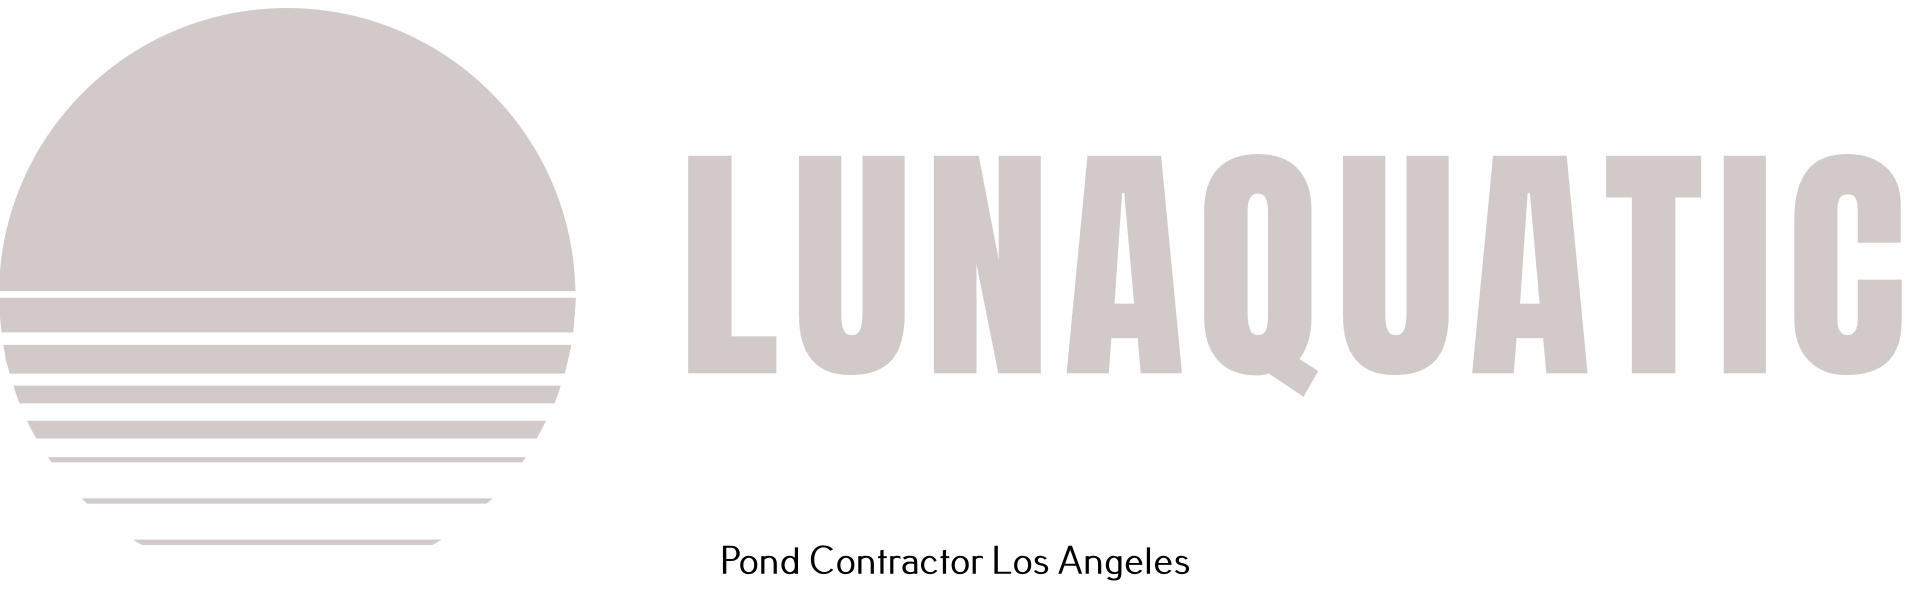 Lunaquatic Has Been Creating One-of-a-Kind Ponds and Water Features